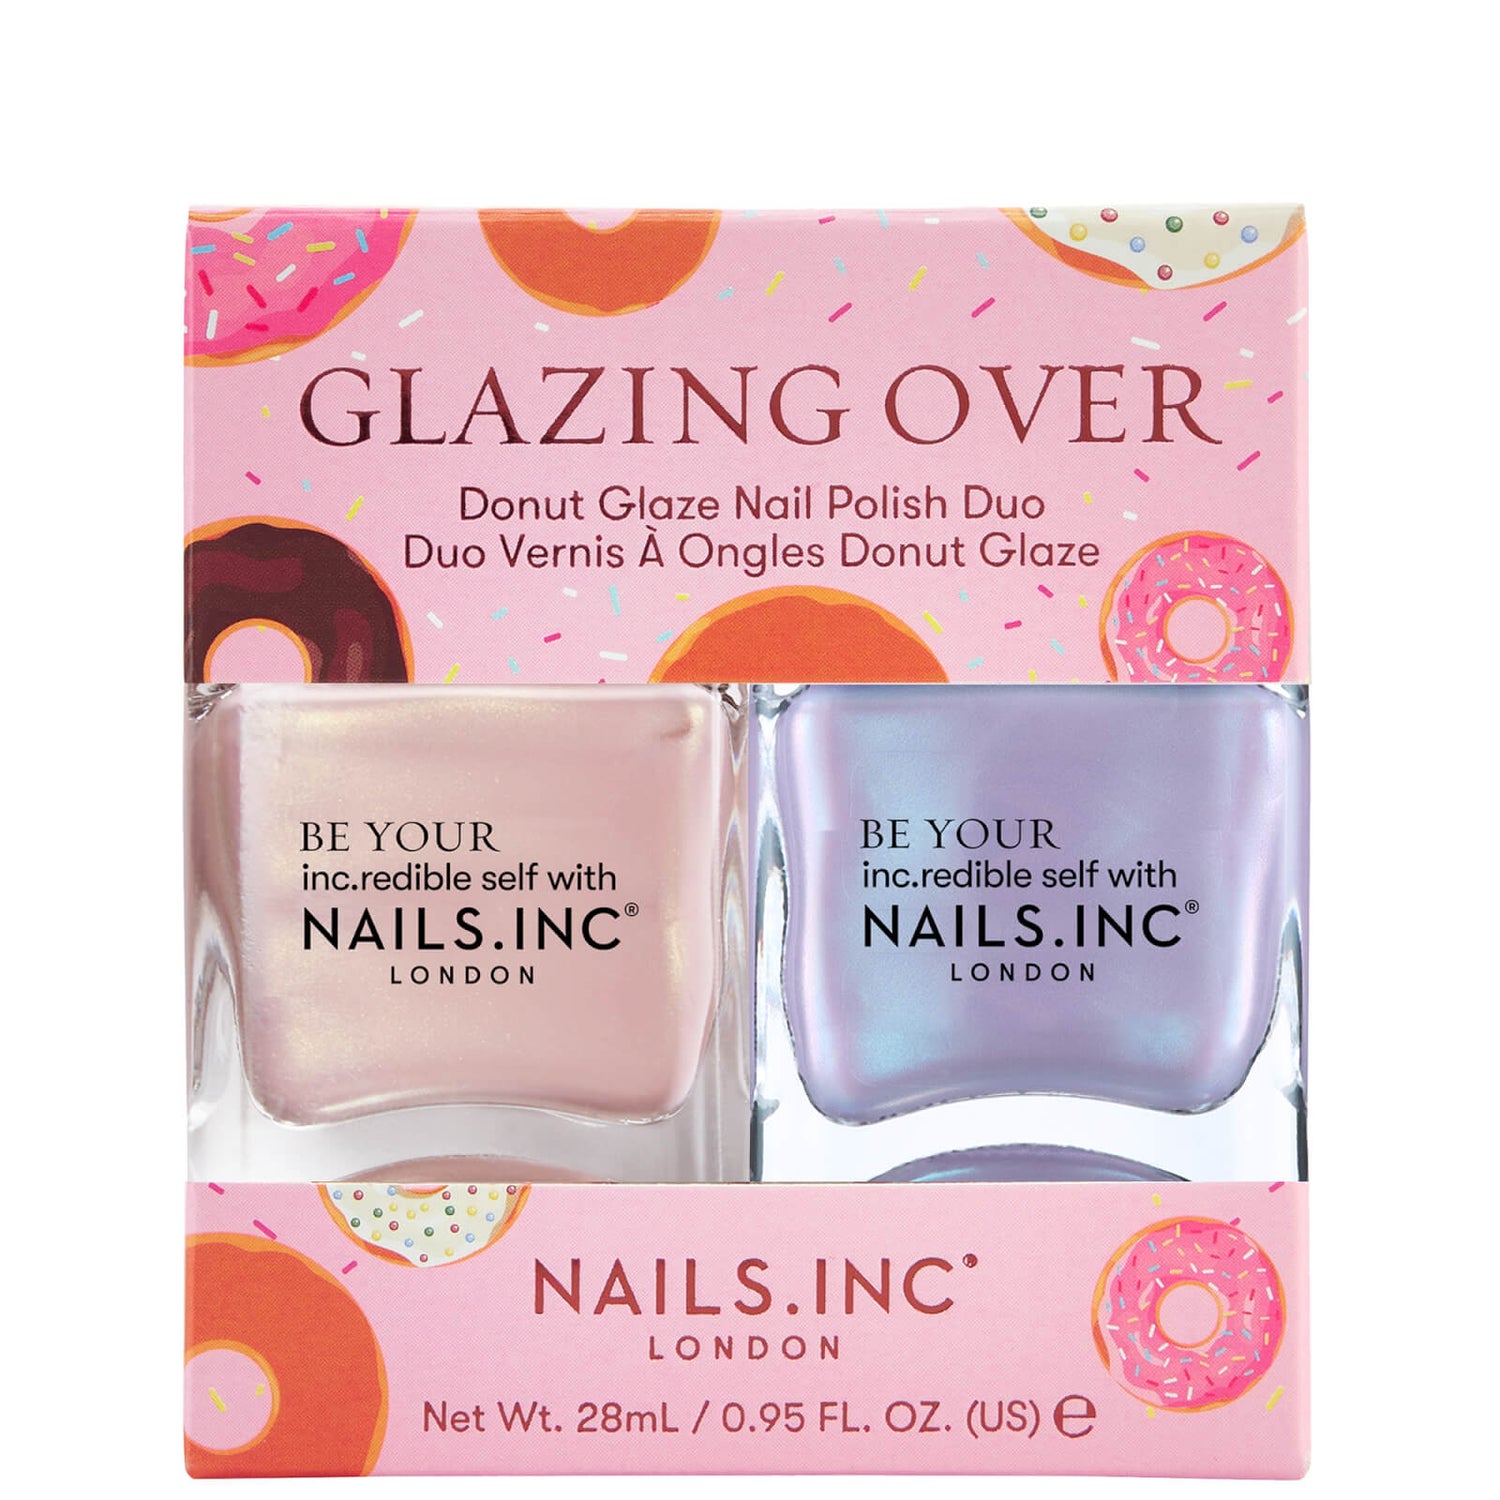 Hurry, 20% off ends soon! ⚡ - Nails inc